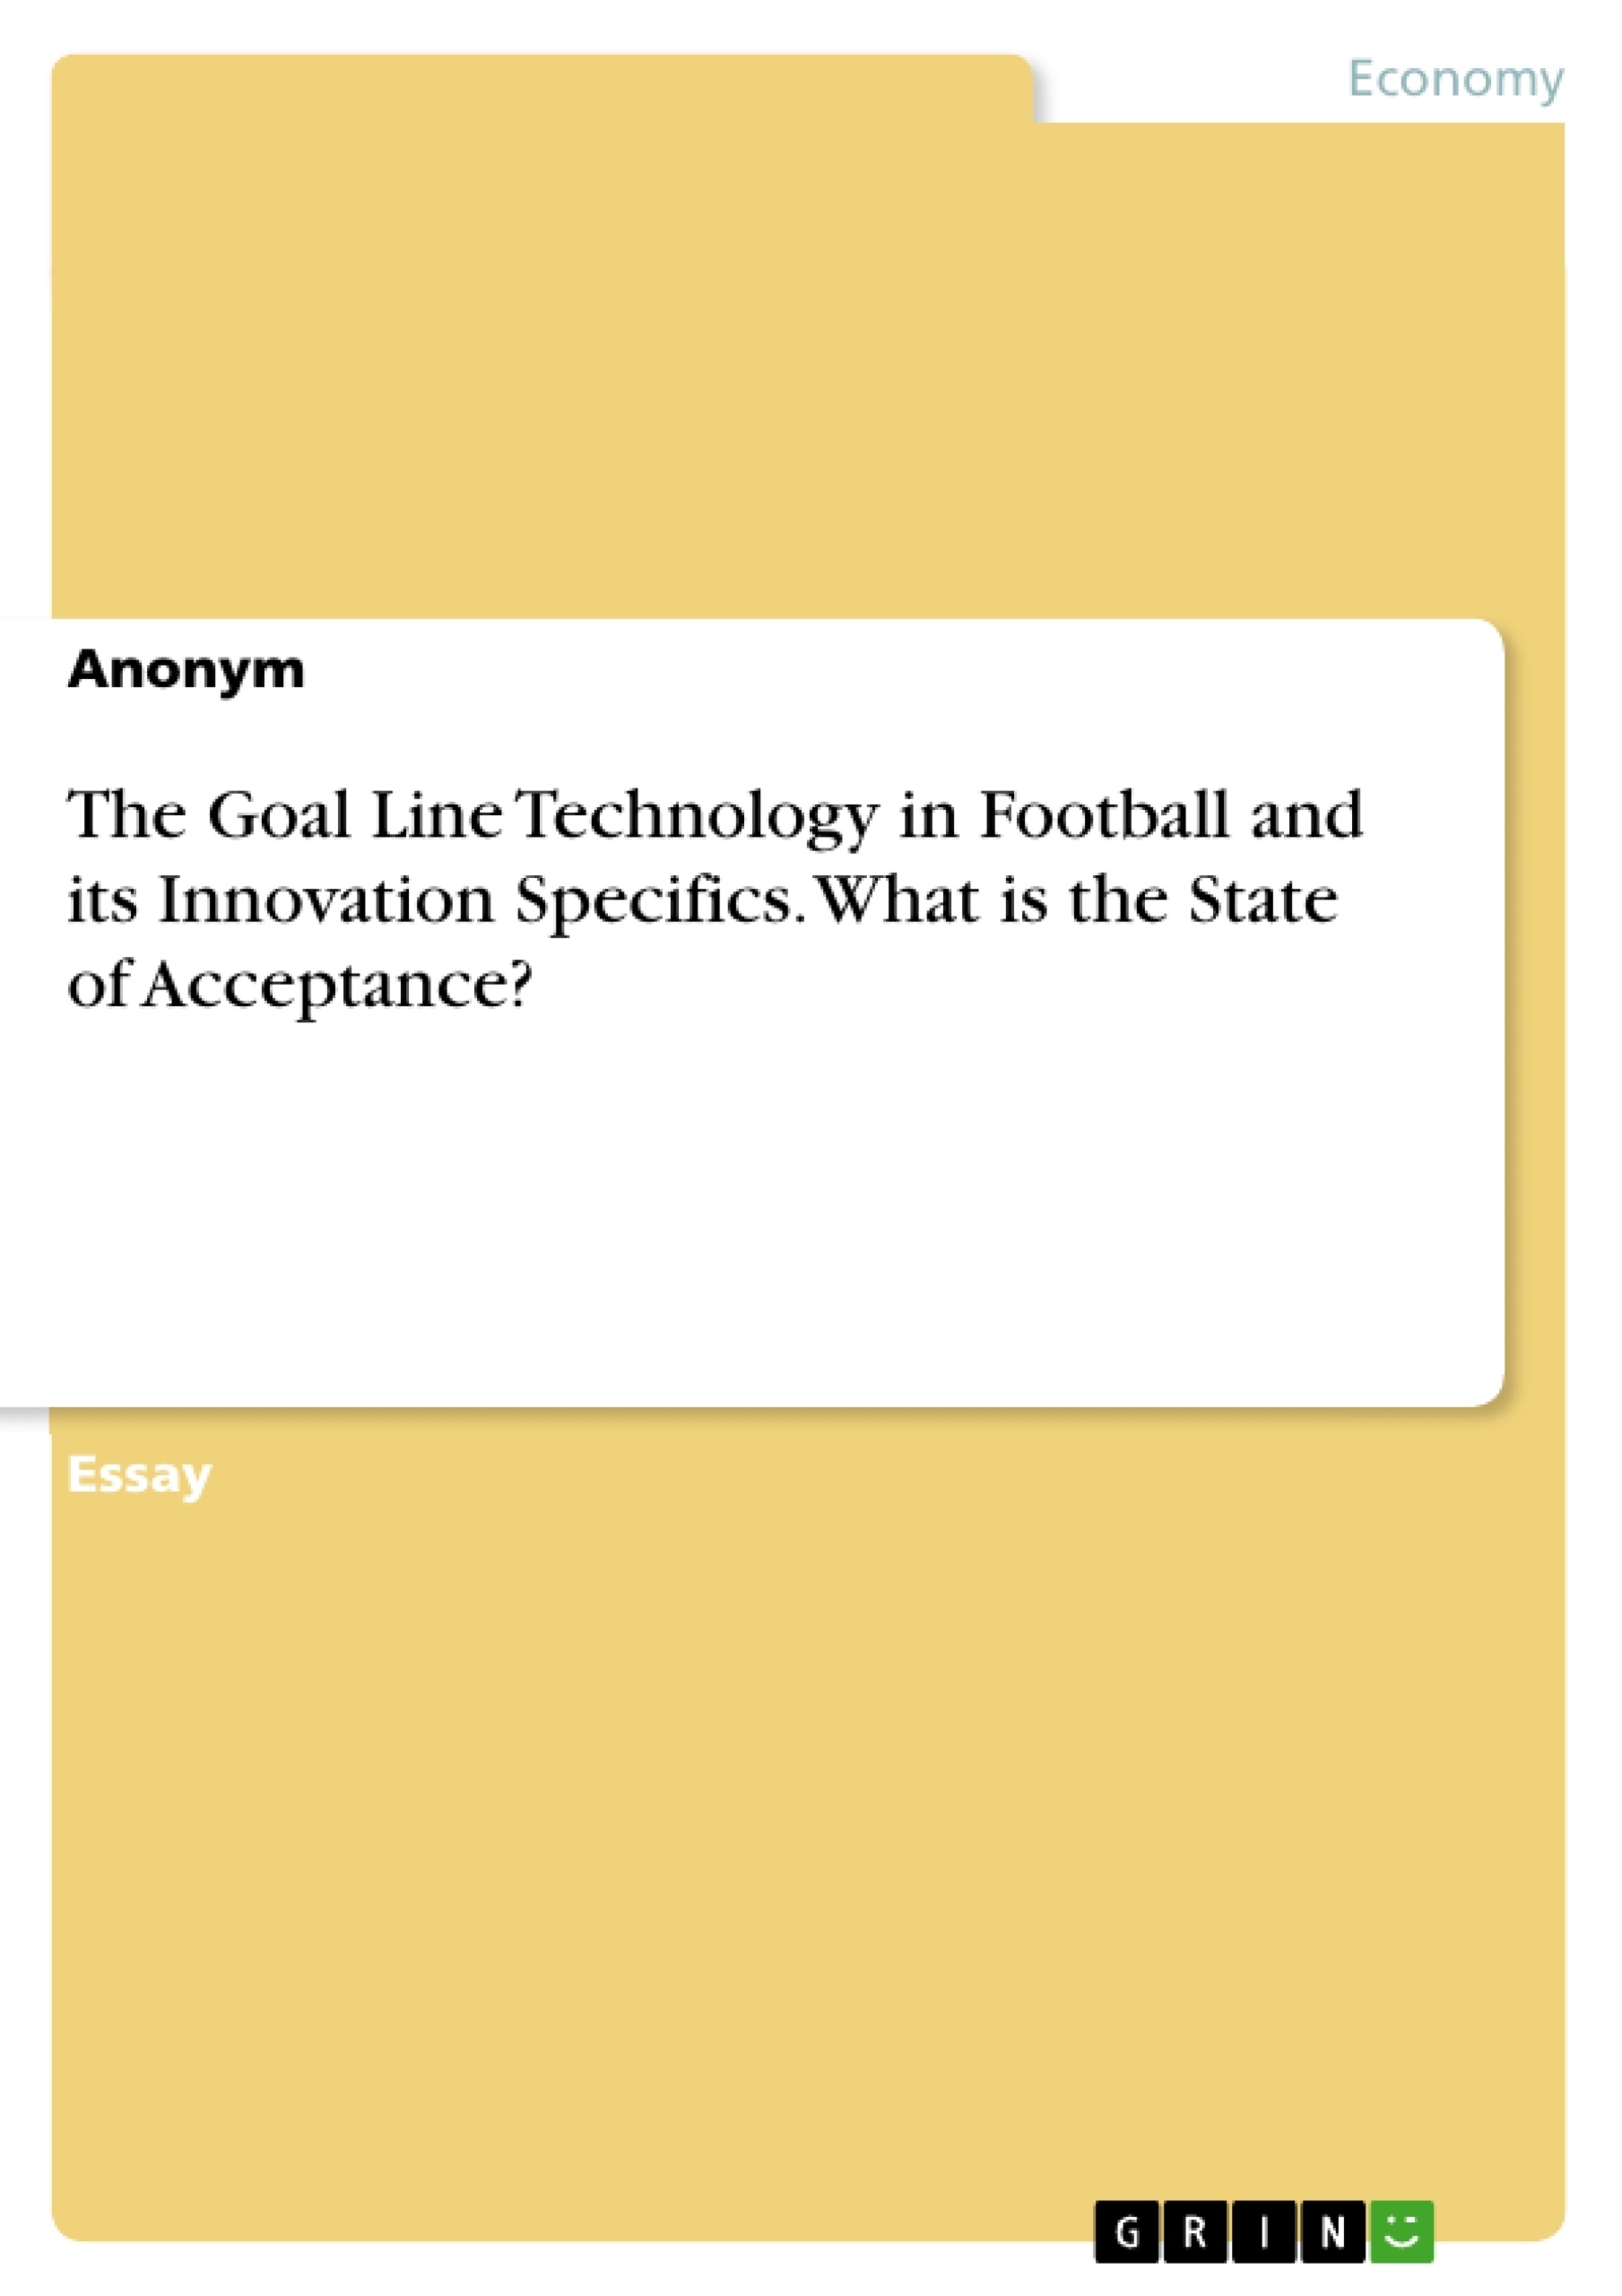 Title: The Goal Line Technology in Football and its Innovation Specifics. What is the State of Acceptance?